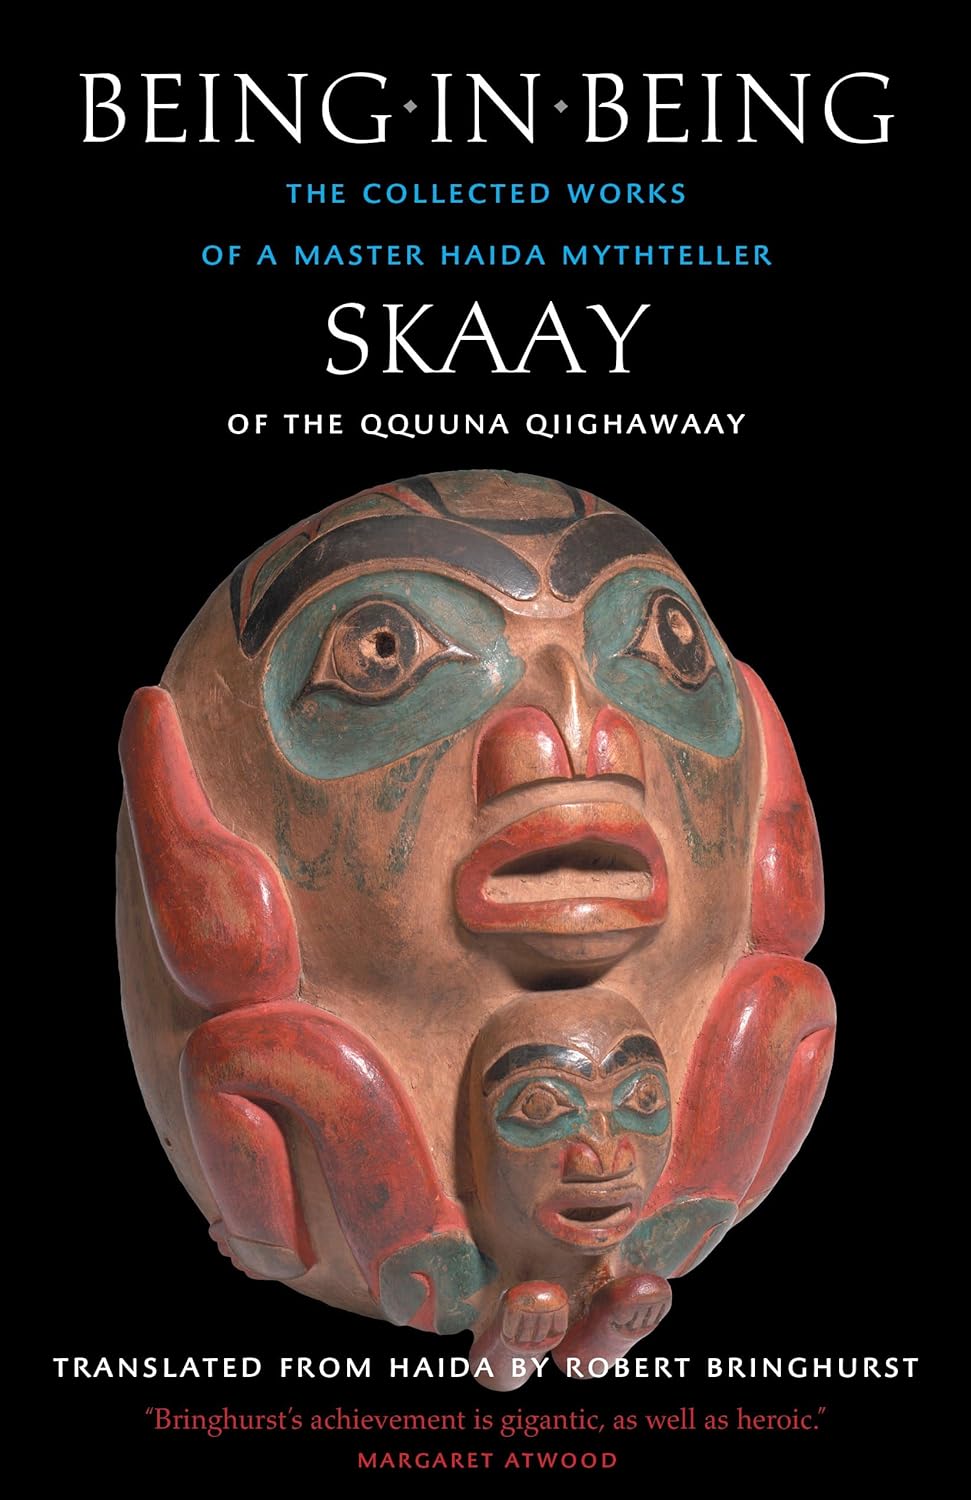 Being in Being: The Collected Works of a Master Haida Mythteller by Skaay of the Qquuna Qiighawaay, translated by Robert Bringhurst 